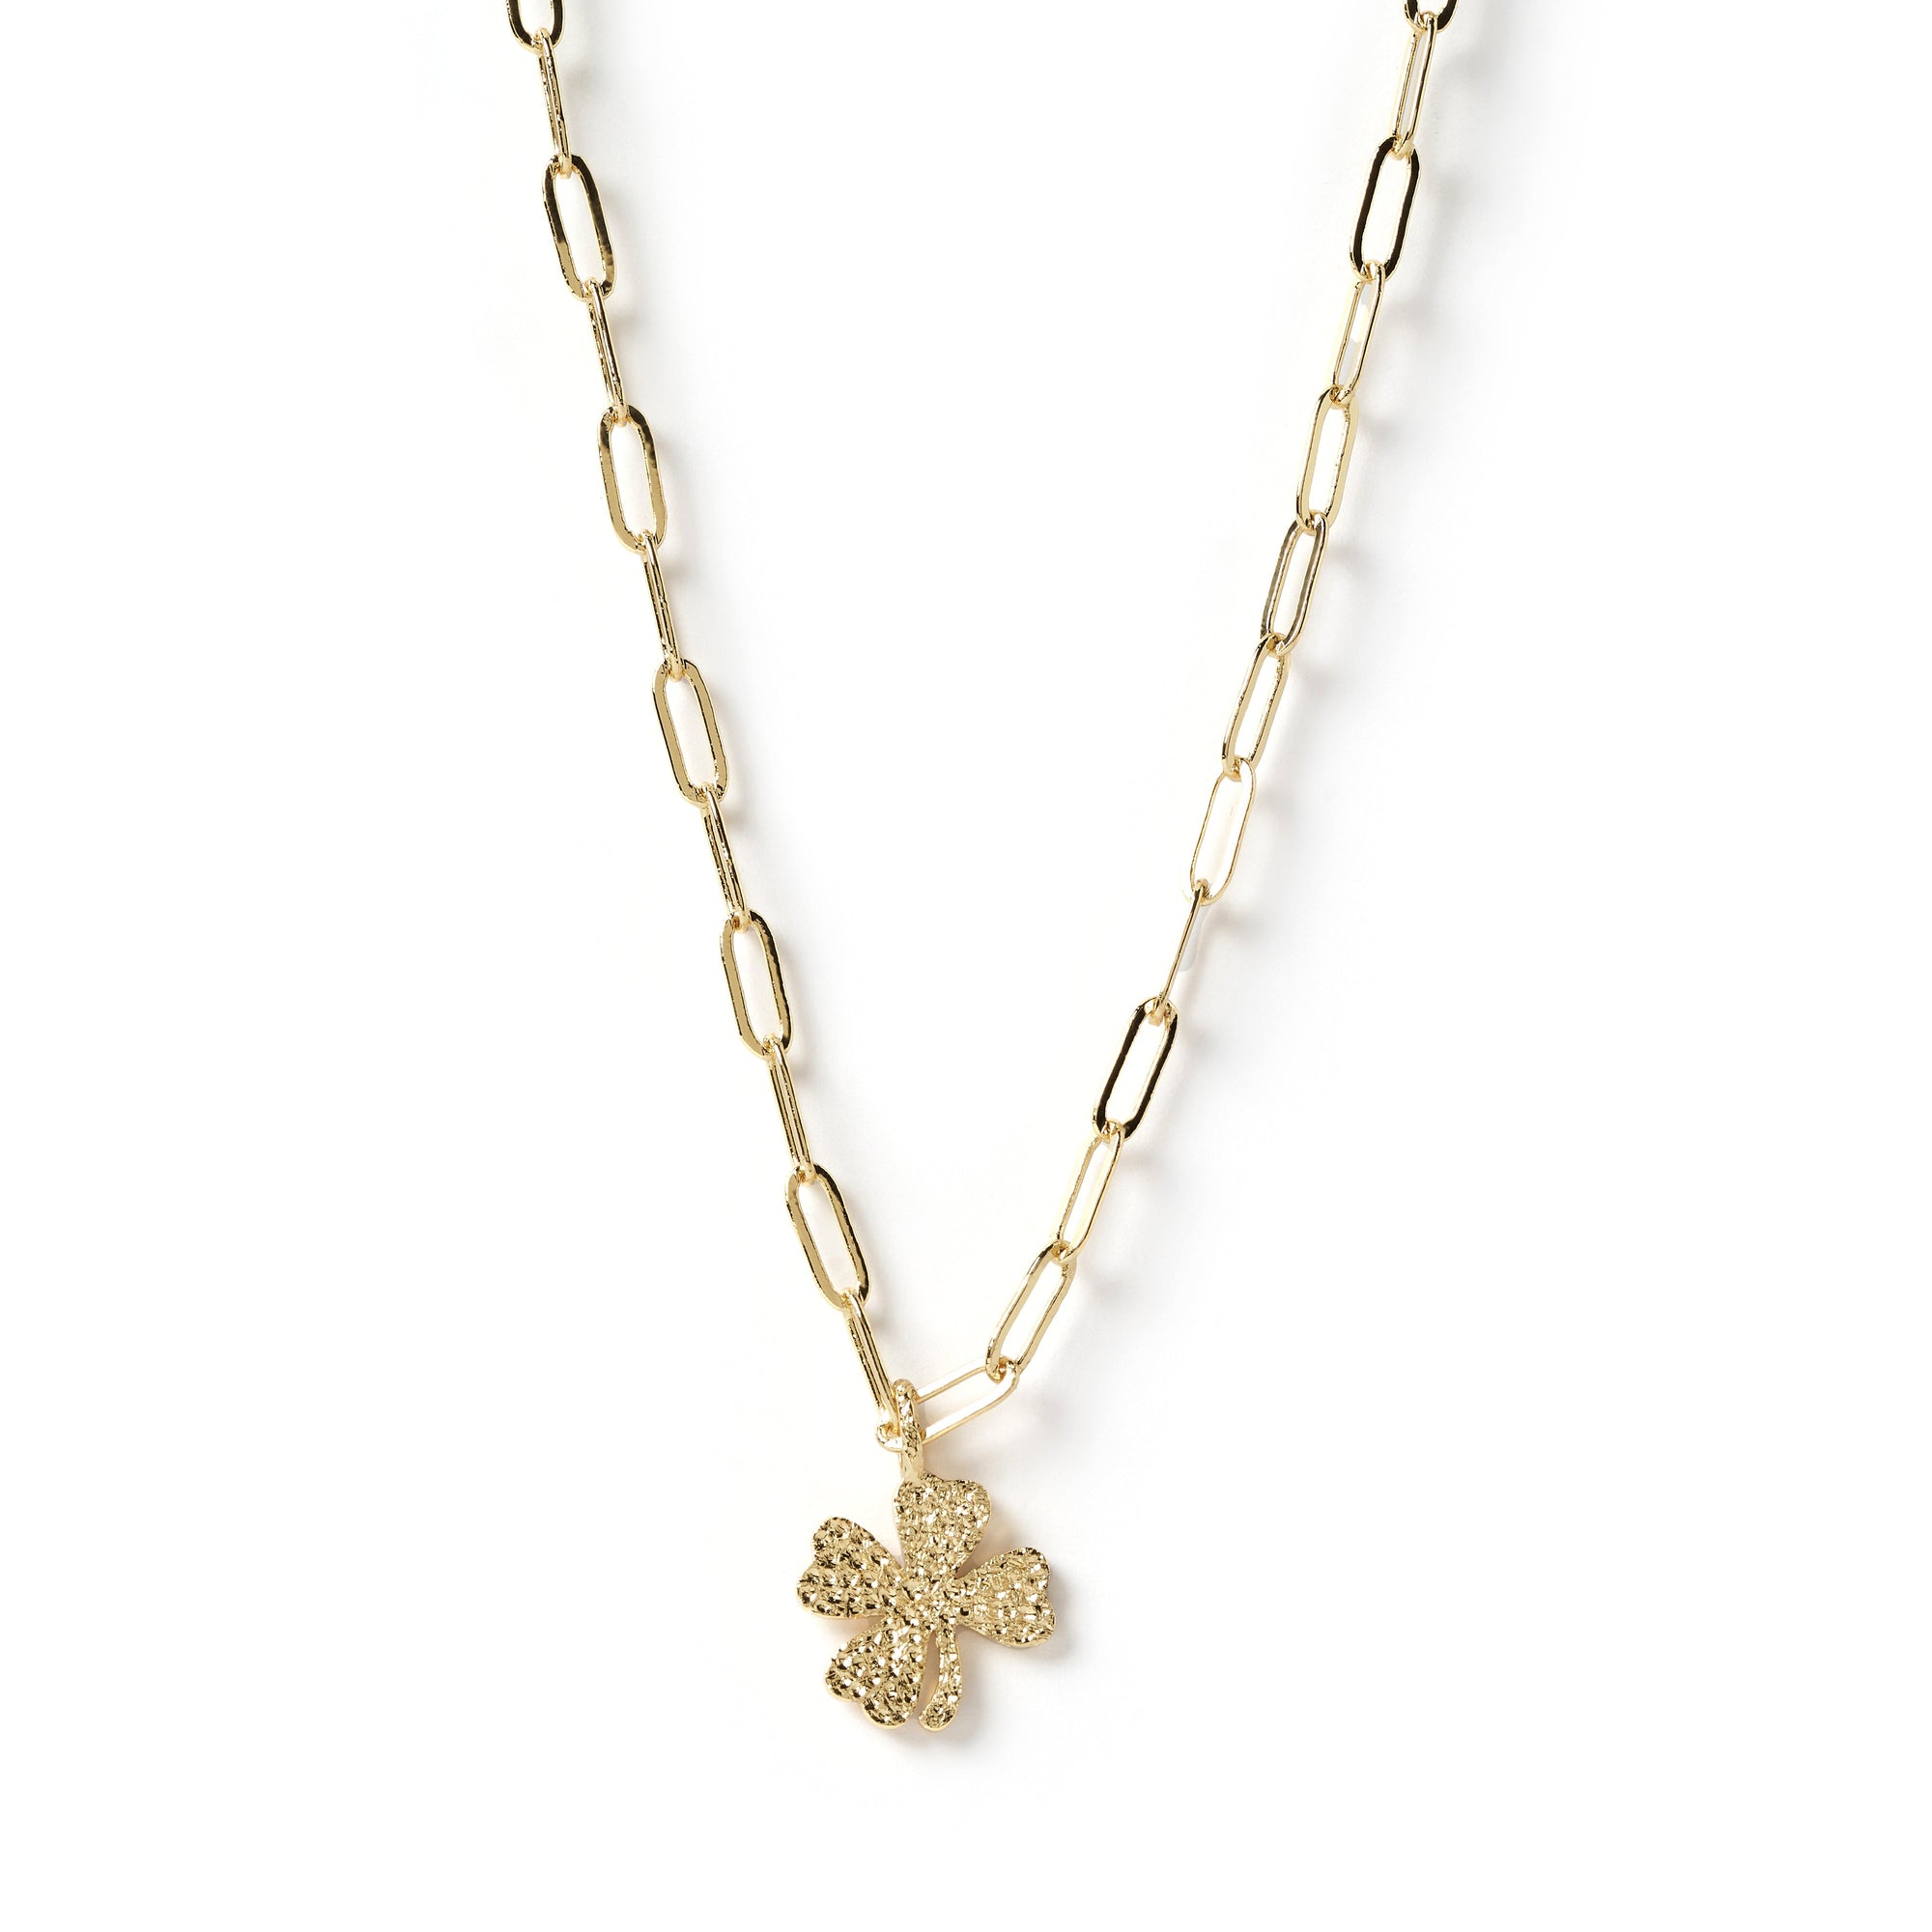 Bransby Gold Clover Necklace